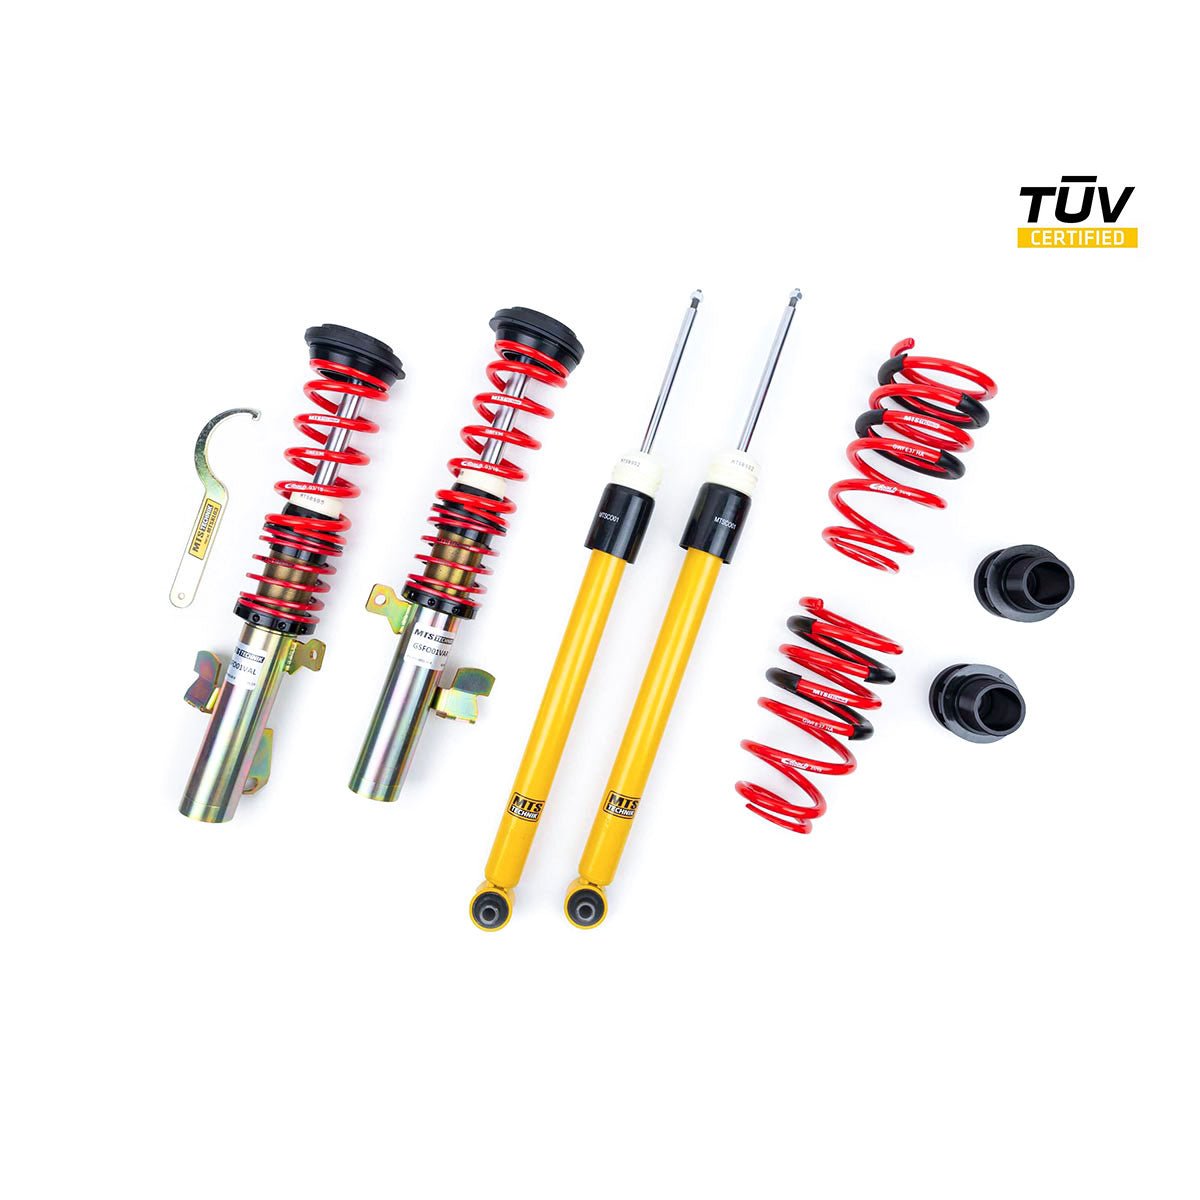 MTS TECHNIK coilover kit STREET Ford Focus MK2 Limousine (with TÜV) - PARTS33 GmbH